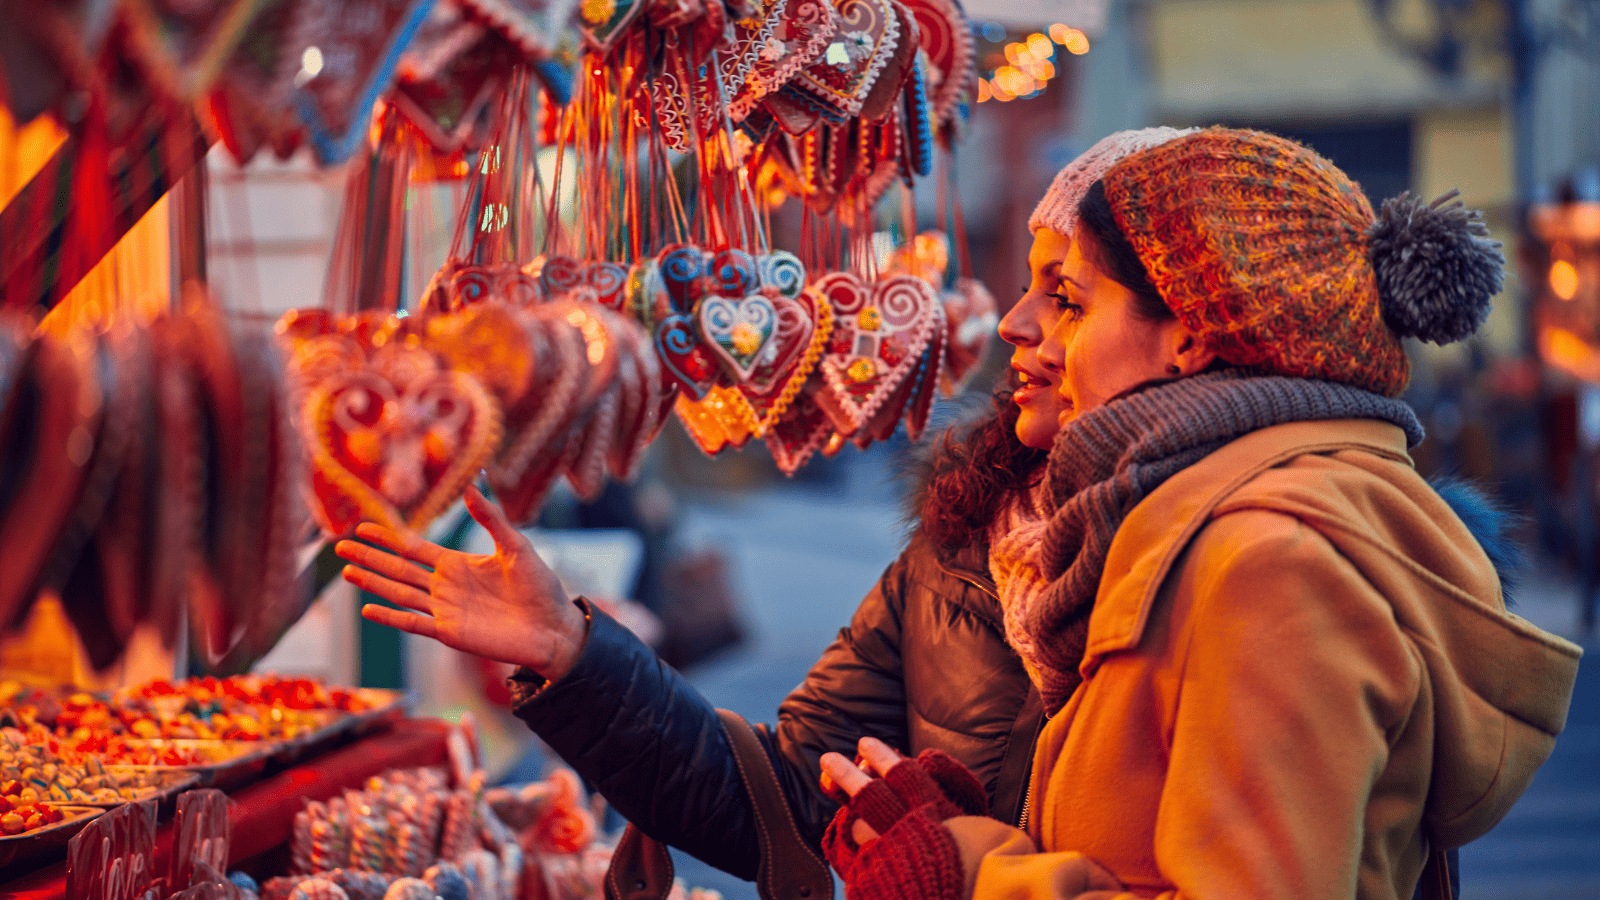 Two women at a Christmas market